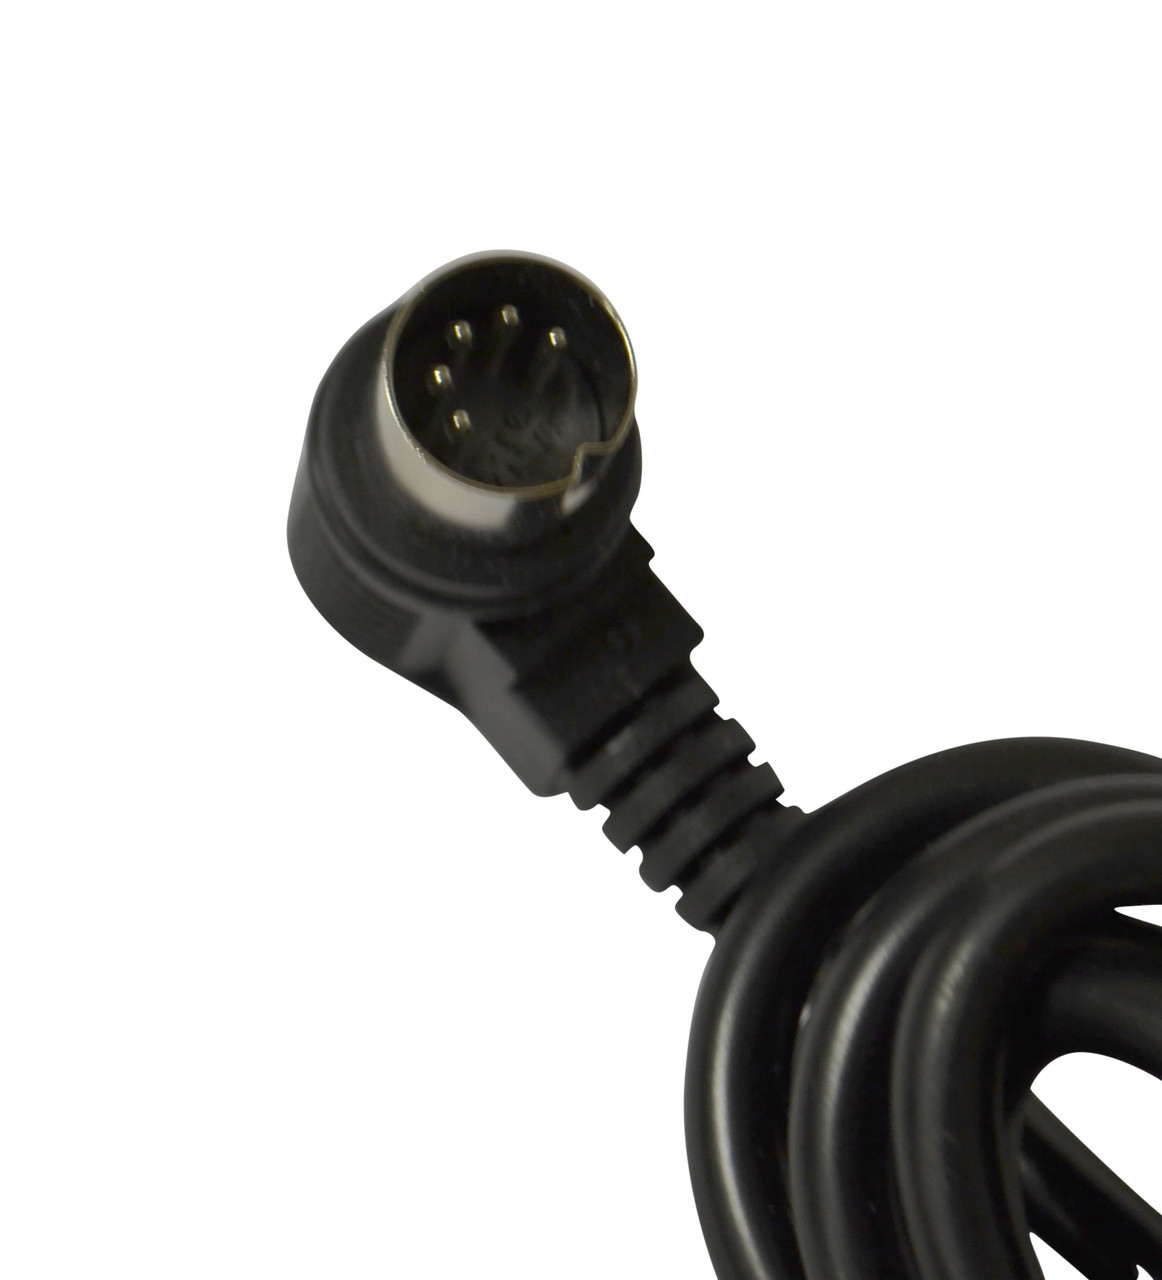 APPROXIMATELY 80 INCH CABLE, QUALITY DESIGN AND MATERIAL, 9 INCH LEVER HANDSET, Okin/Limoss 5 Pin Plug, 1 Year Mfg. Warranty when purchased from seller Recliner-Handles